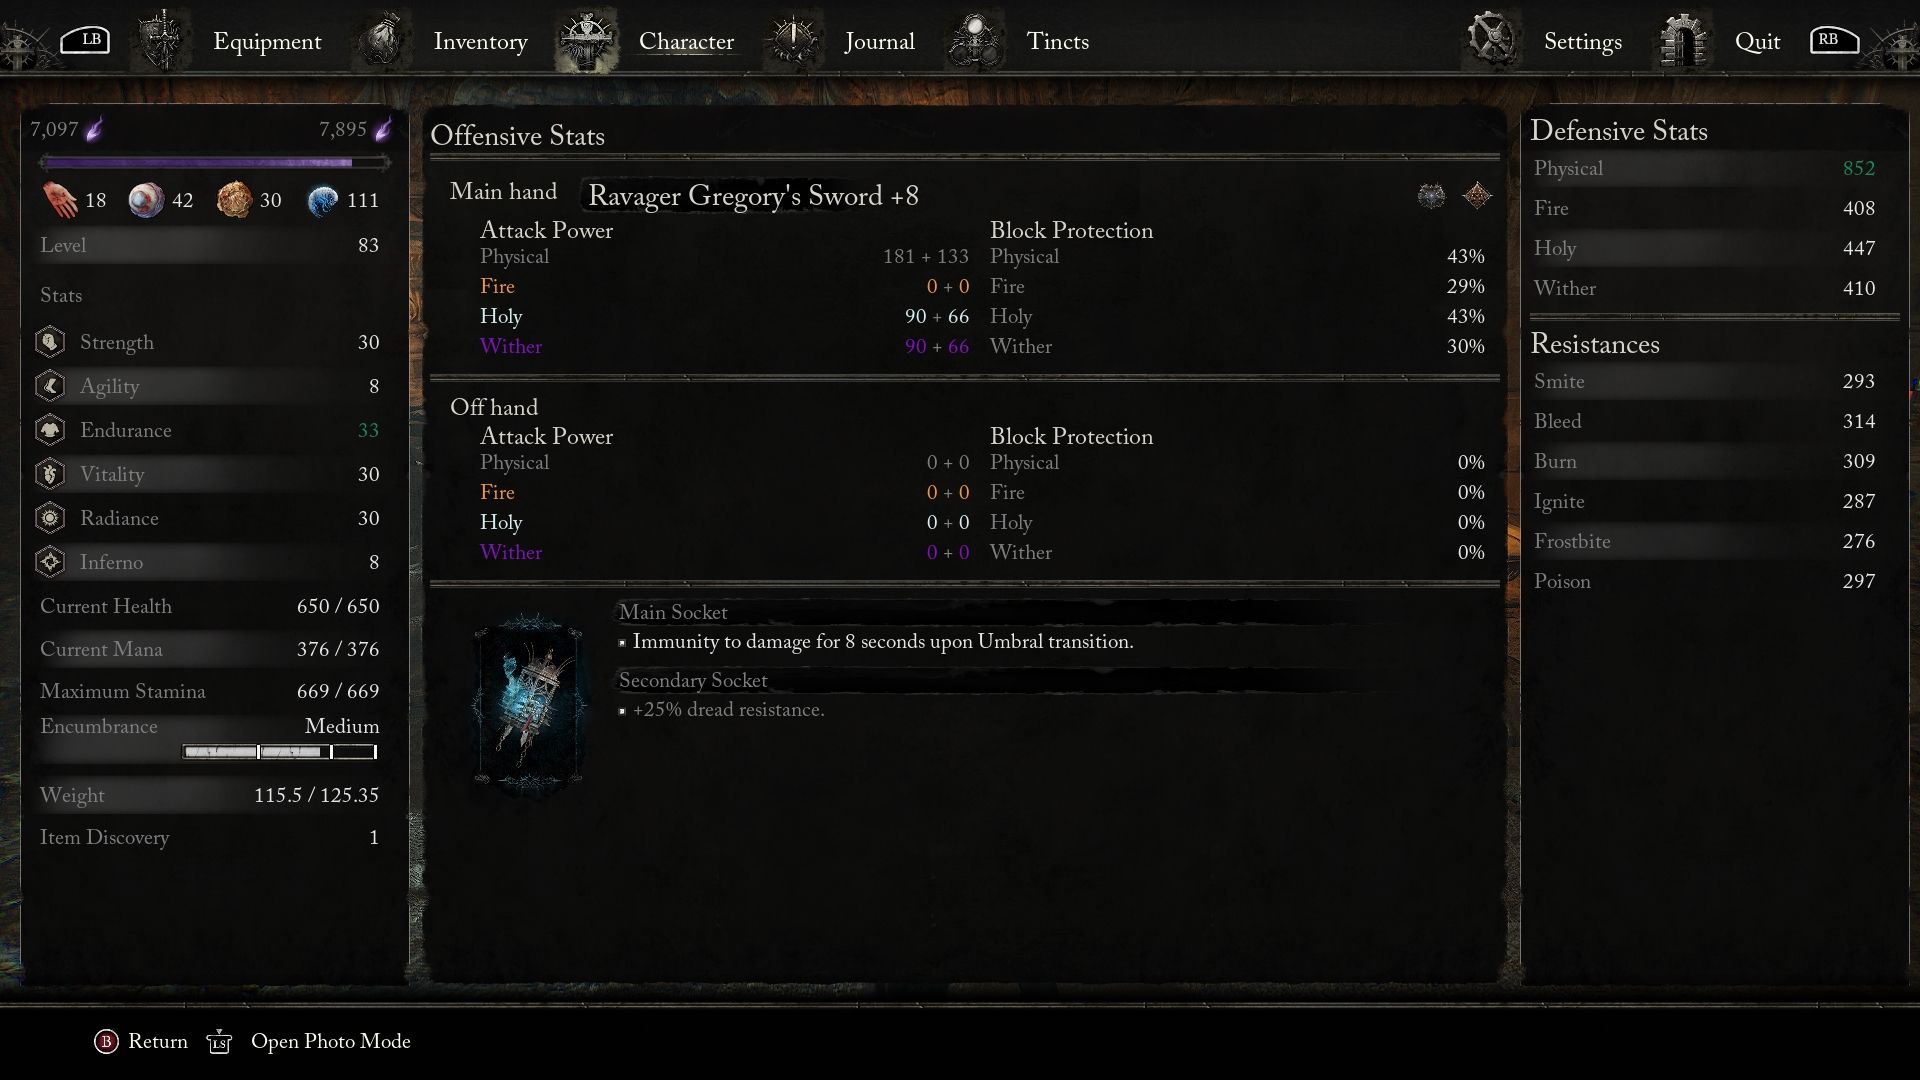 A picture showing the character menu with all the stats Lords of the Fallen